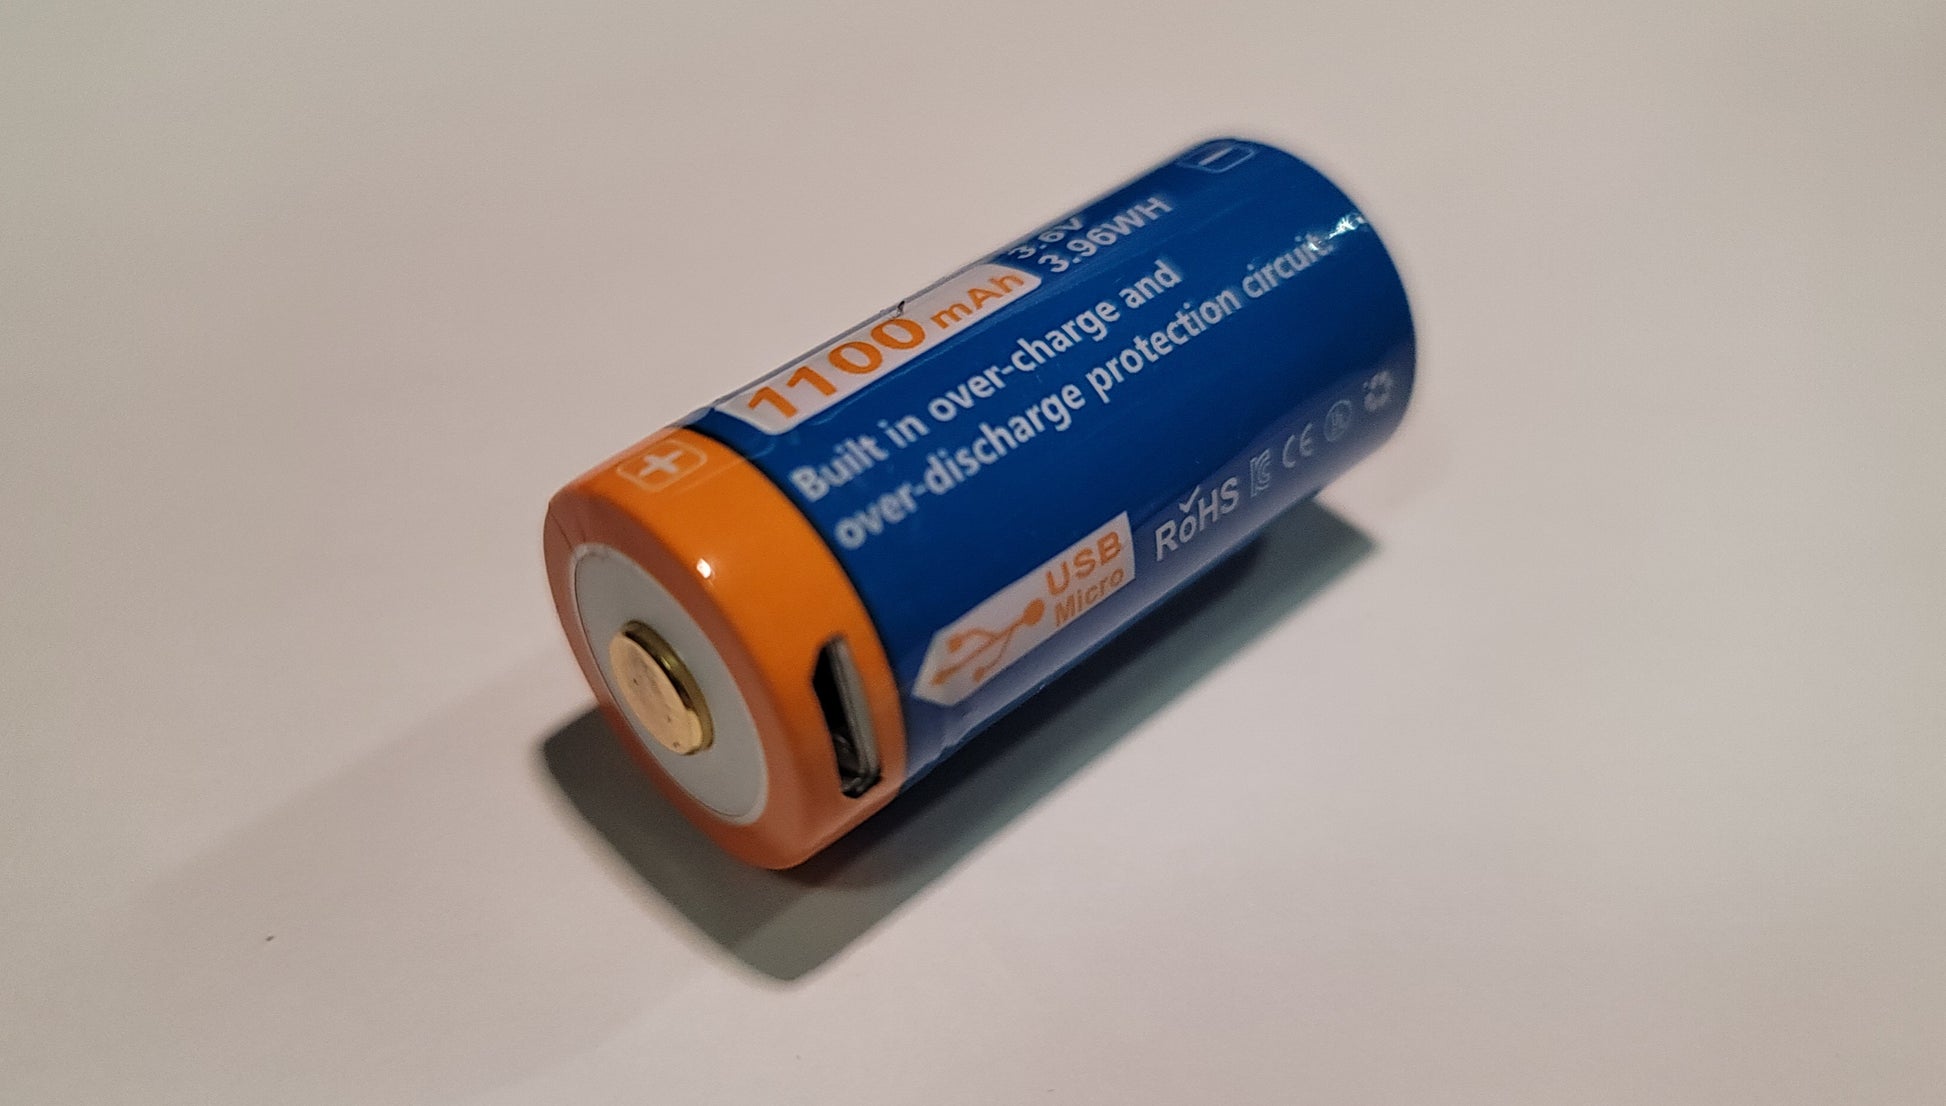 Jetbeam 18350 JR11 1100mAh Lithium-ion Rechargeable Battery